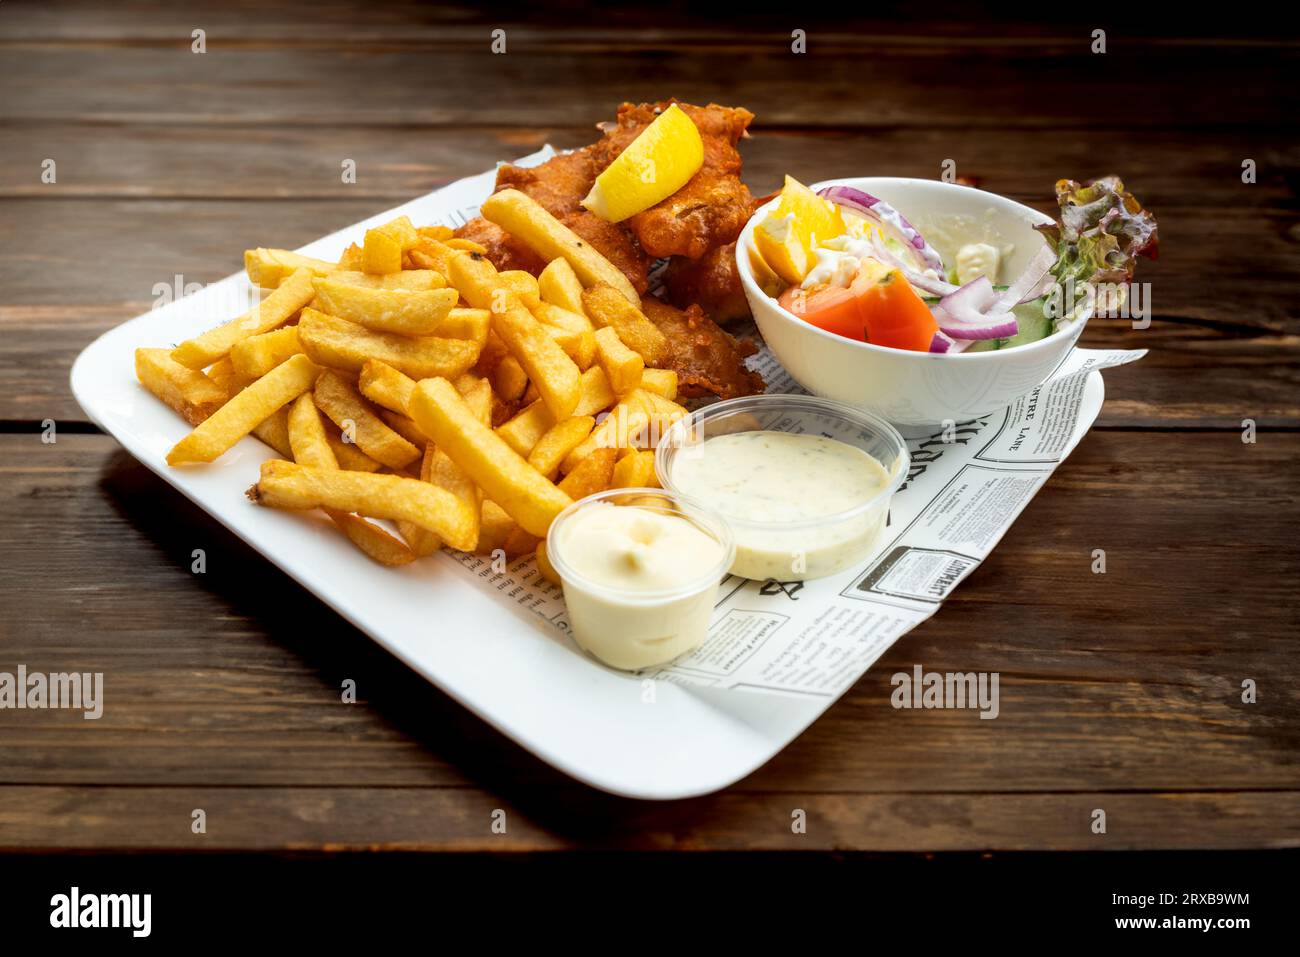 Fried fish, french fries, salad and sauces served on a white plate with newspaper decoration Stock Photo